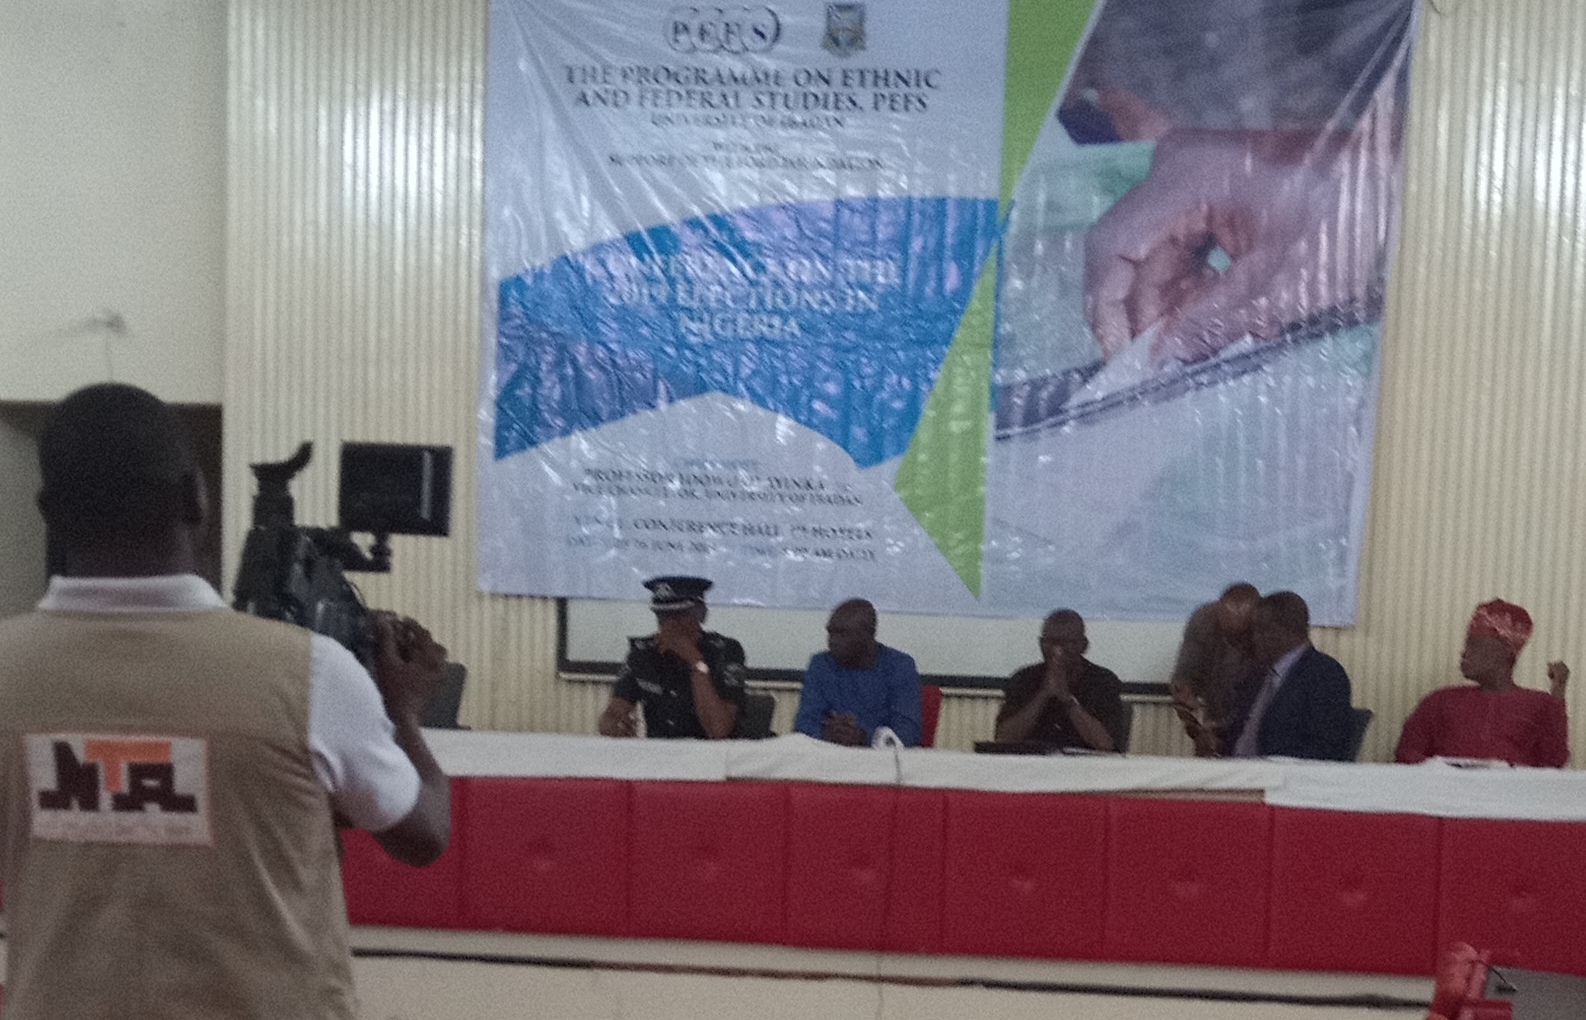 Multivocal Convulsions as Intellectuals, IGP, INEC, Others Deconstruct Nigeria’s 2019 Elections @ UI Confab